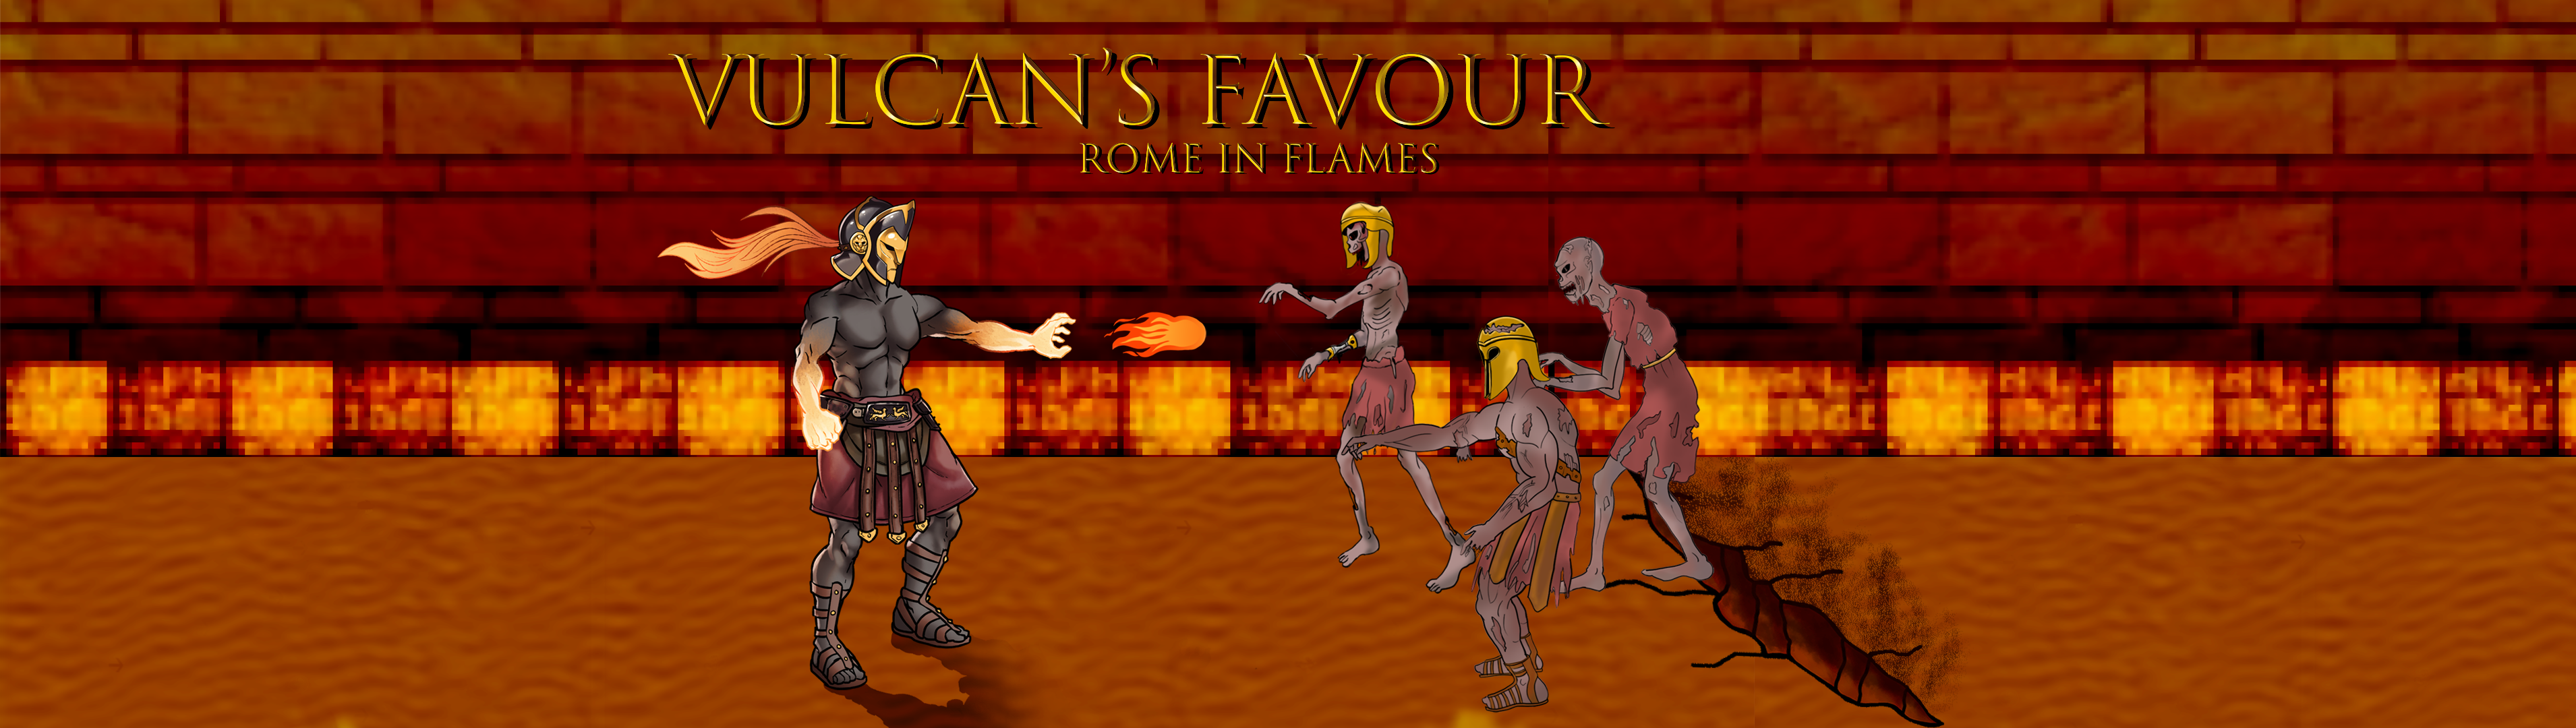 Vulcans Favour - Rome in Flames